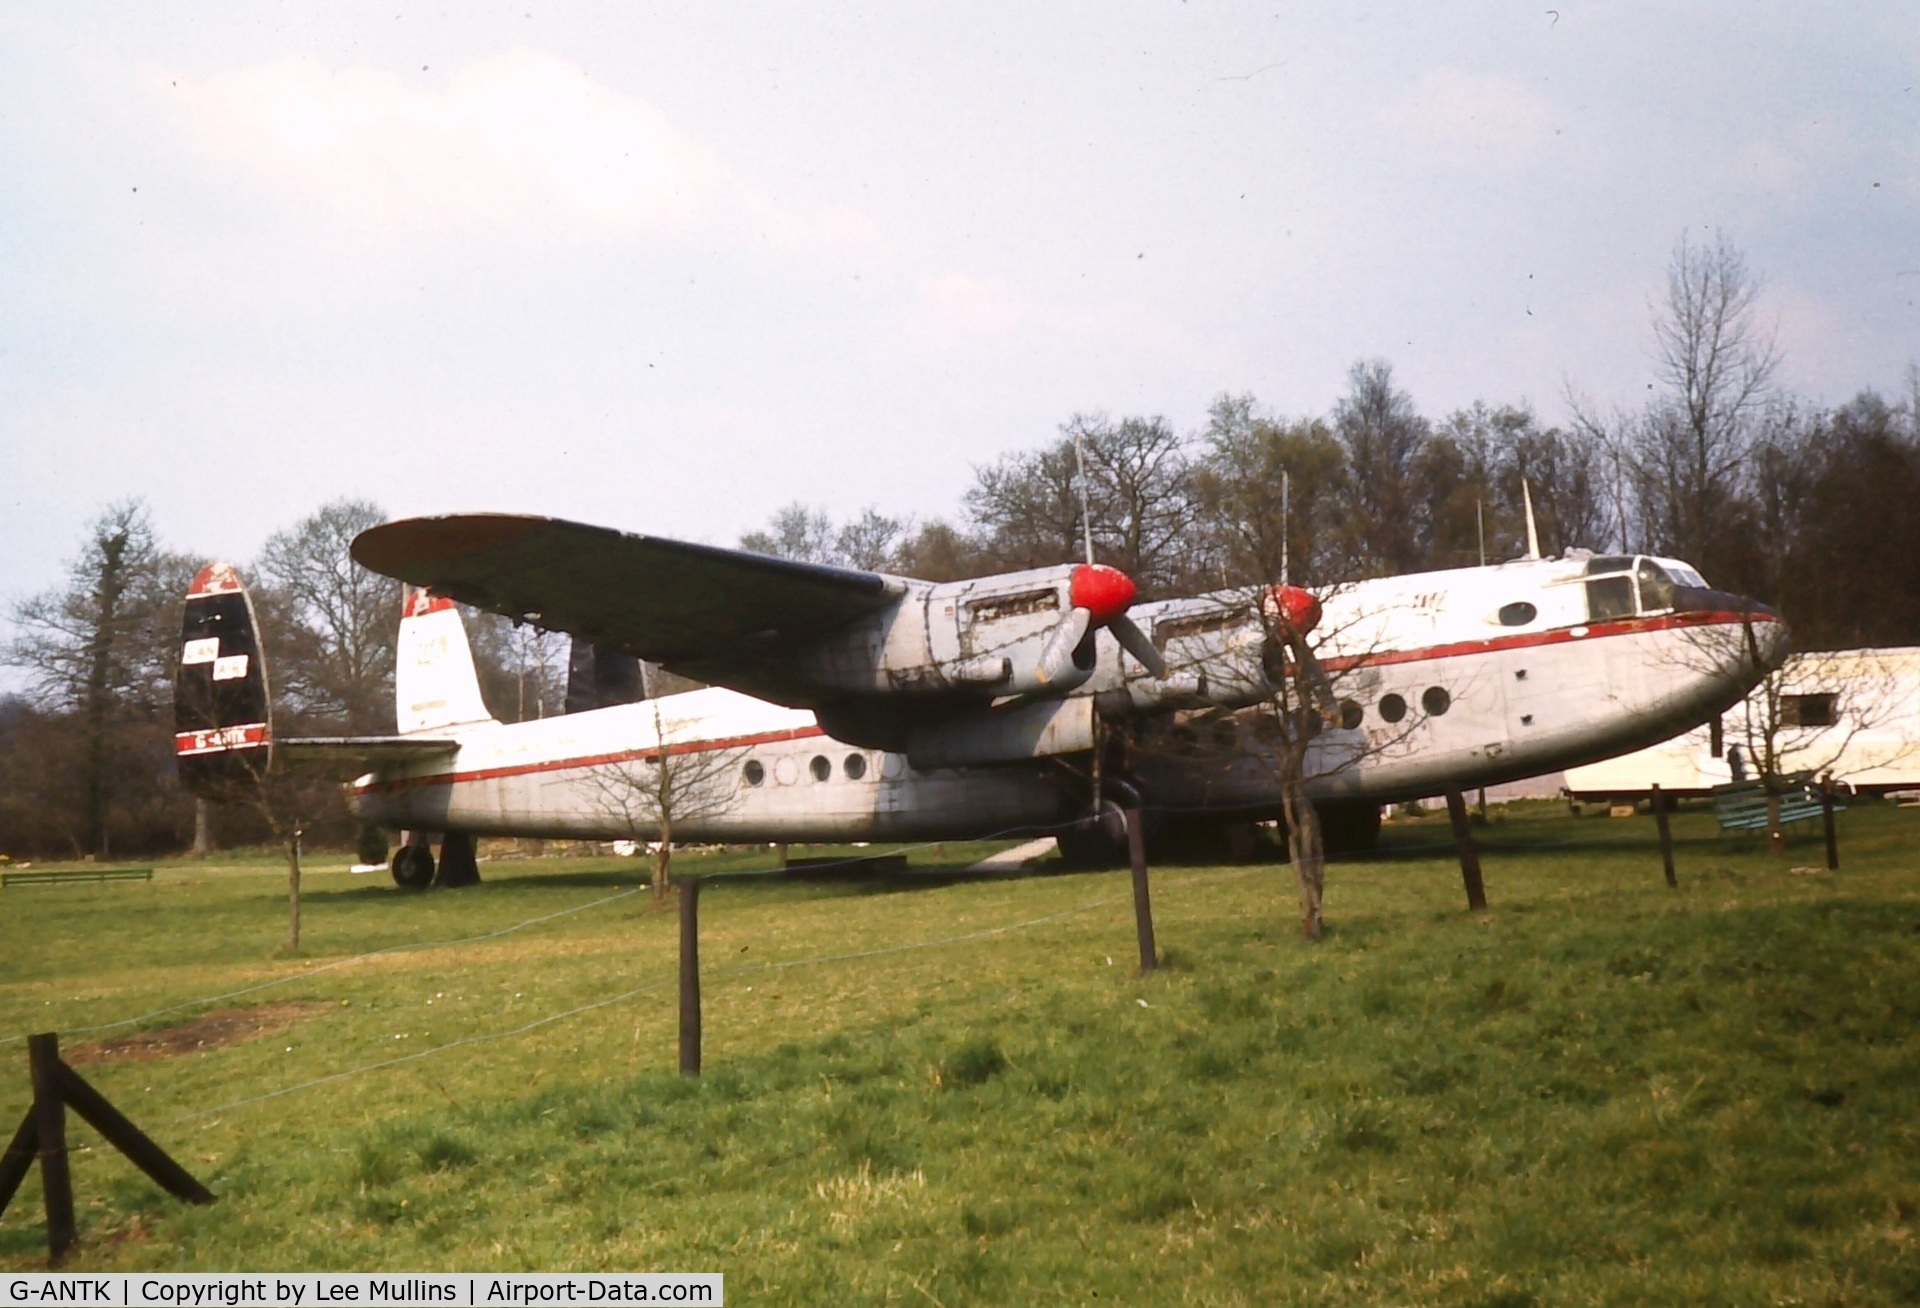 G-ANTK, 1946 Avro 685 YORK C1 C/N MW232, Dan-Air York being used as a bunk house for the Air Scouts at Lasham C1972